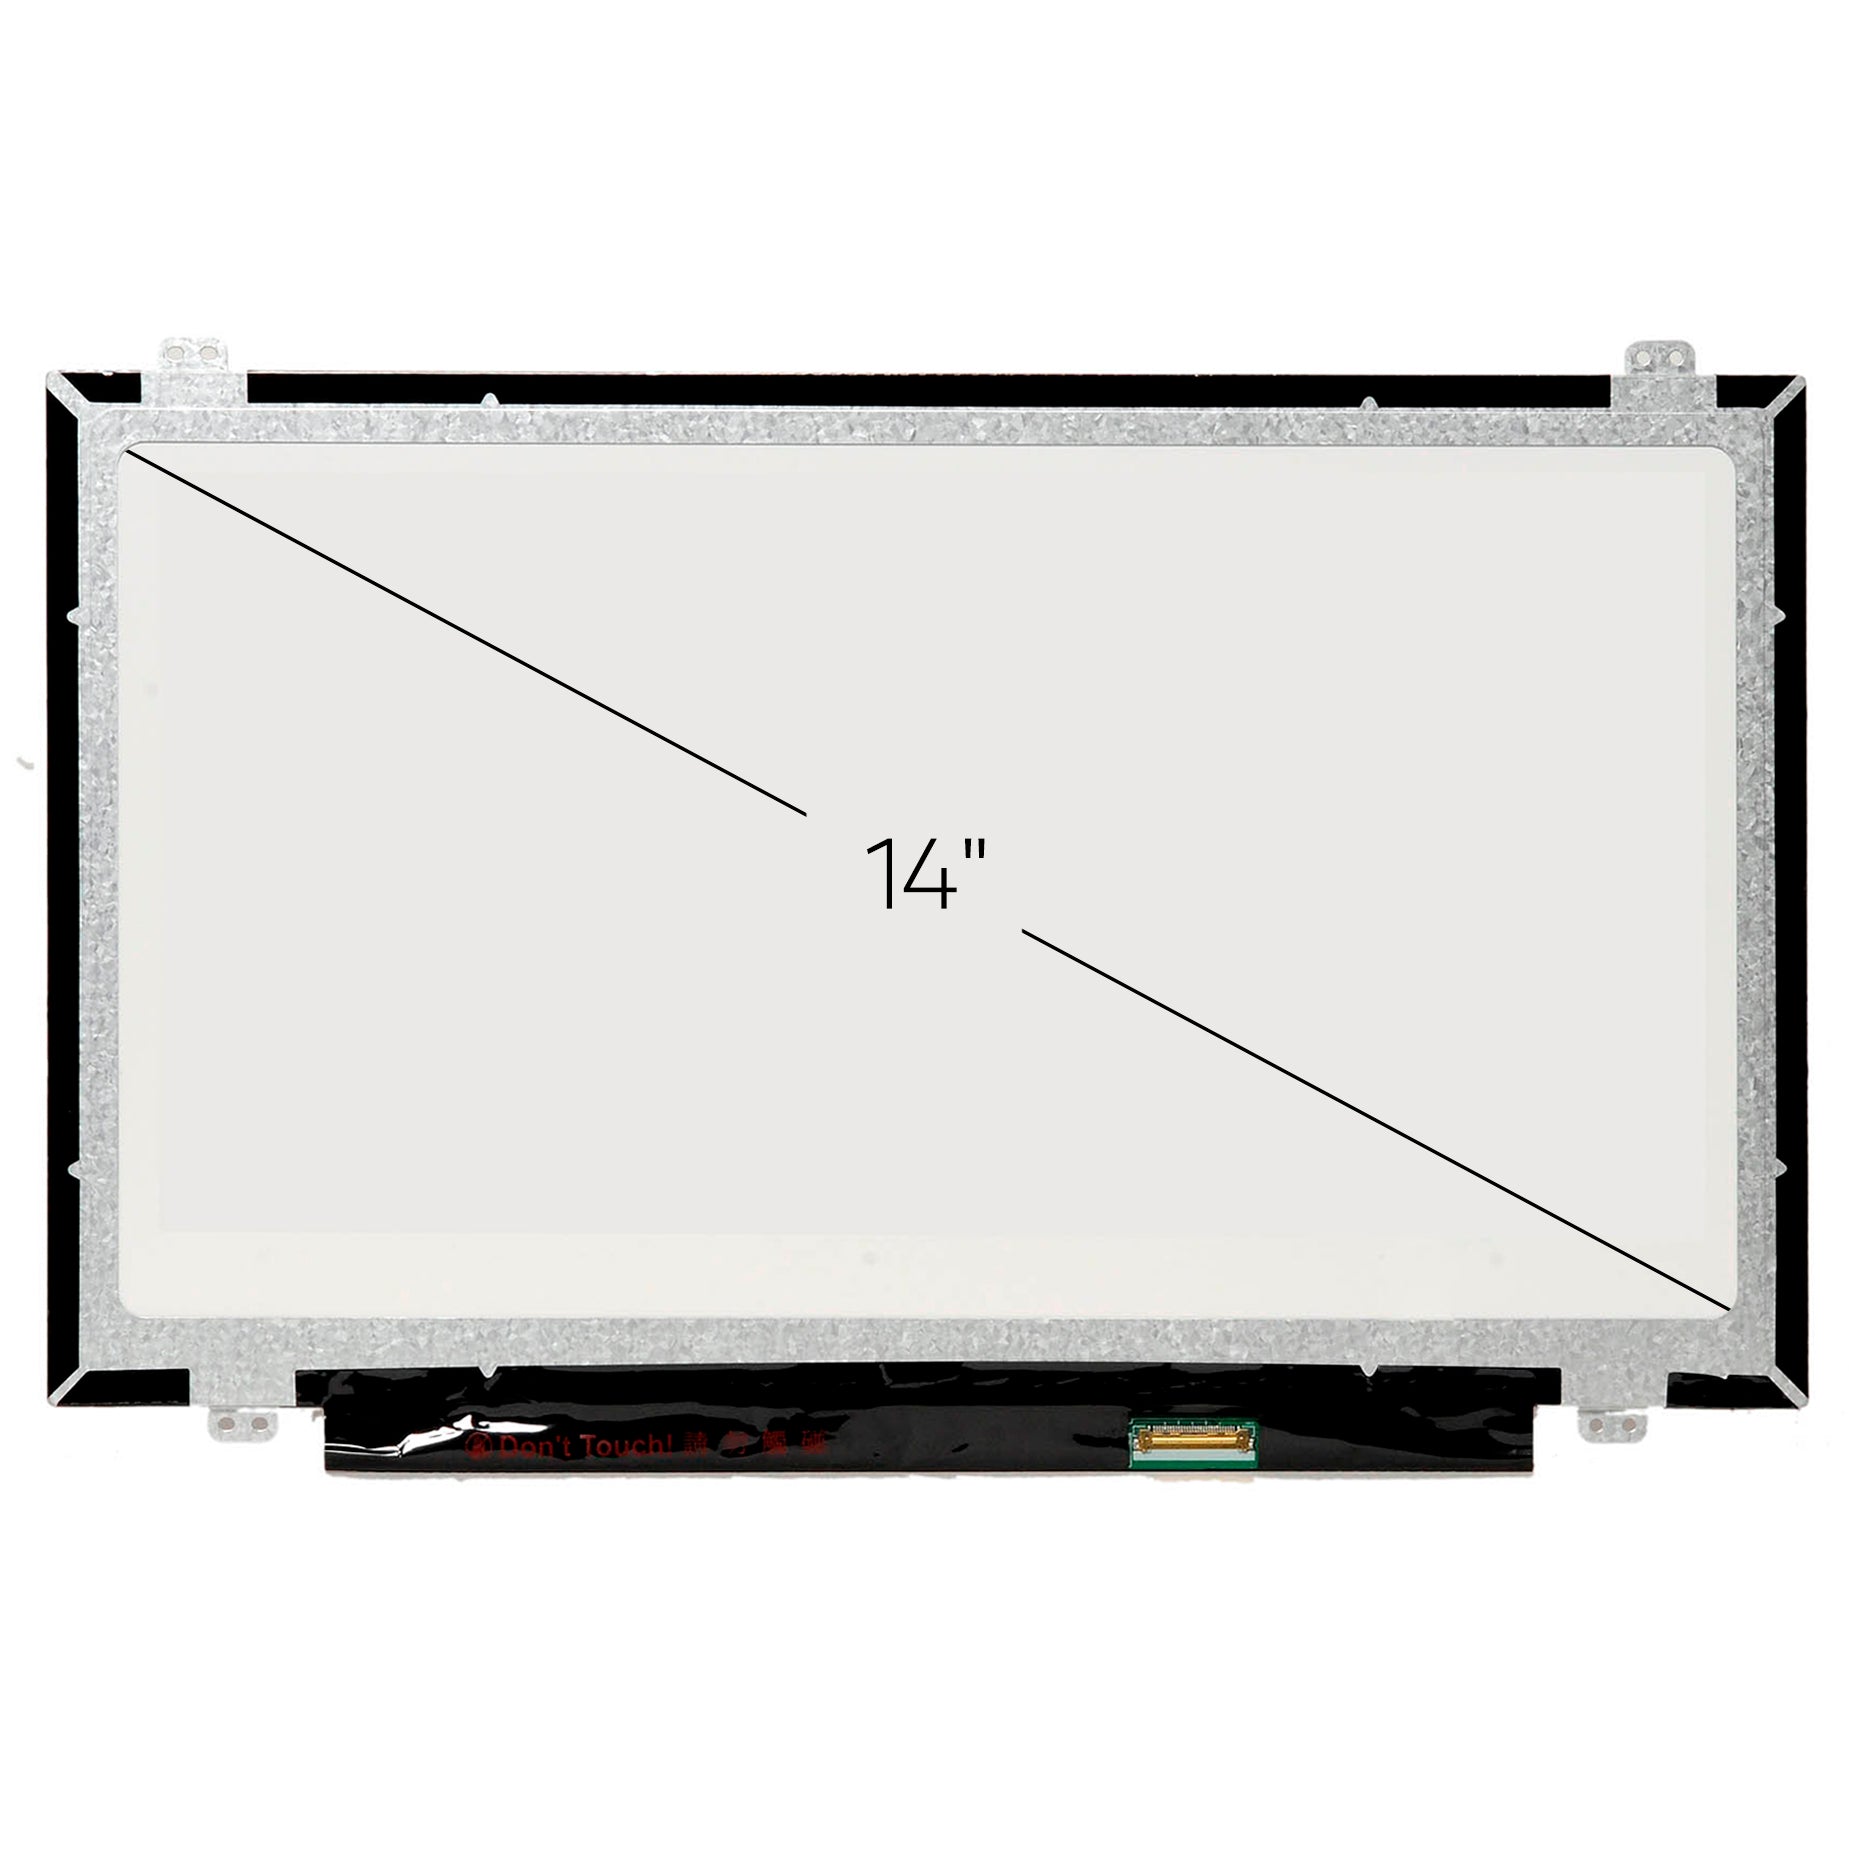 Screen Replacement for Lenovo Thinkpad L440 HD 1366x768 Glossy LCD LED Display